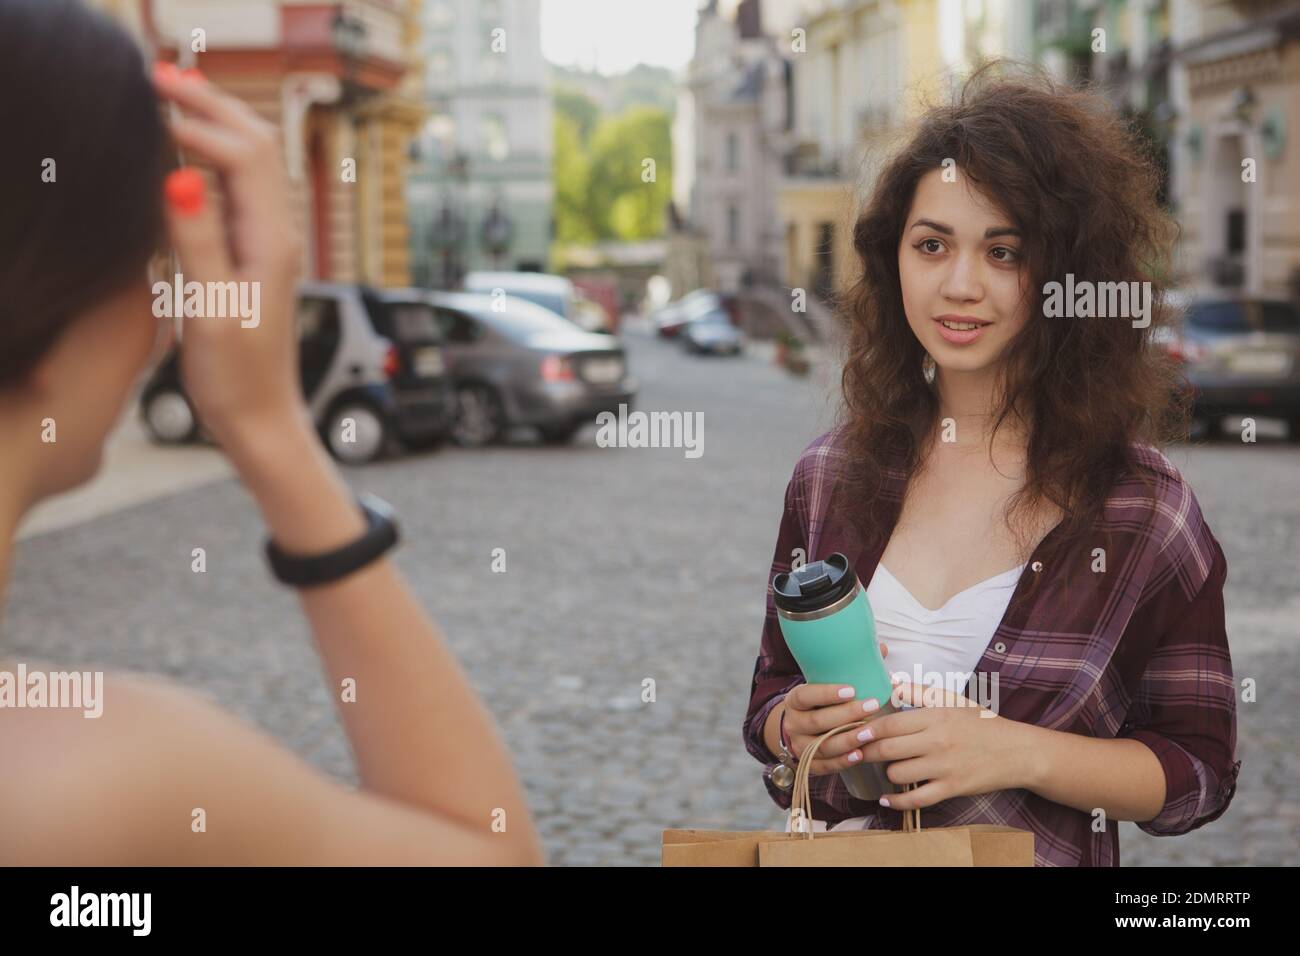 Two young women talking, enjoying warm day, wandering in the city. Lovely woman smiling at her friend while talking on city streets Stock Photo